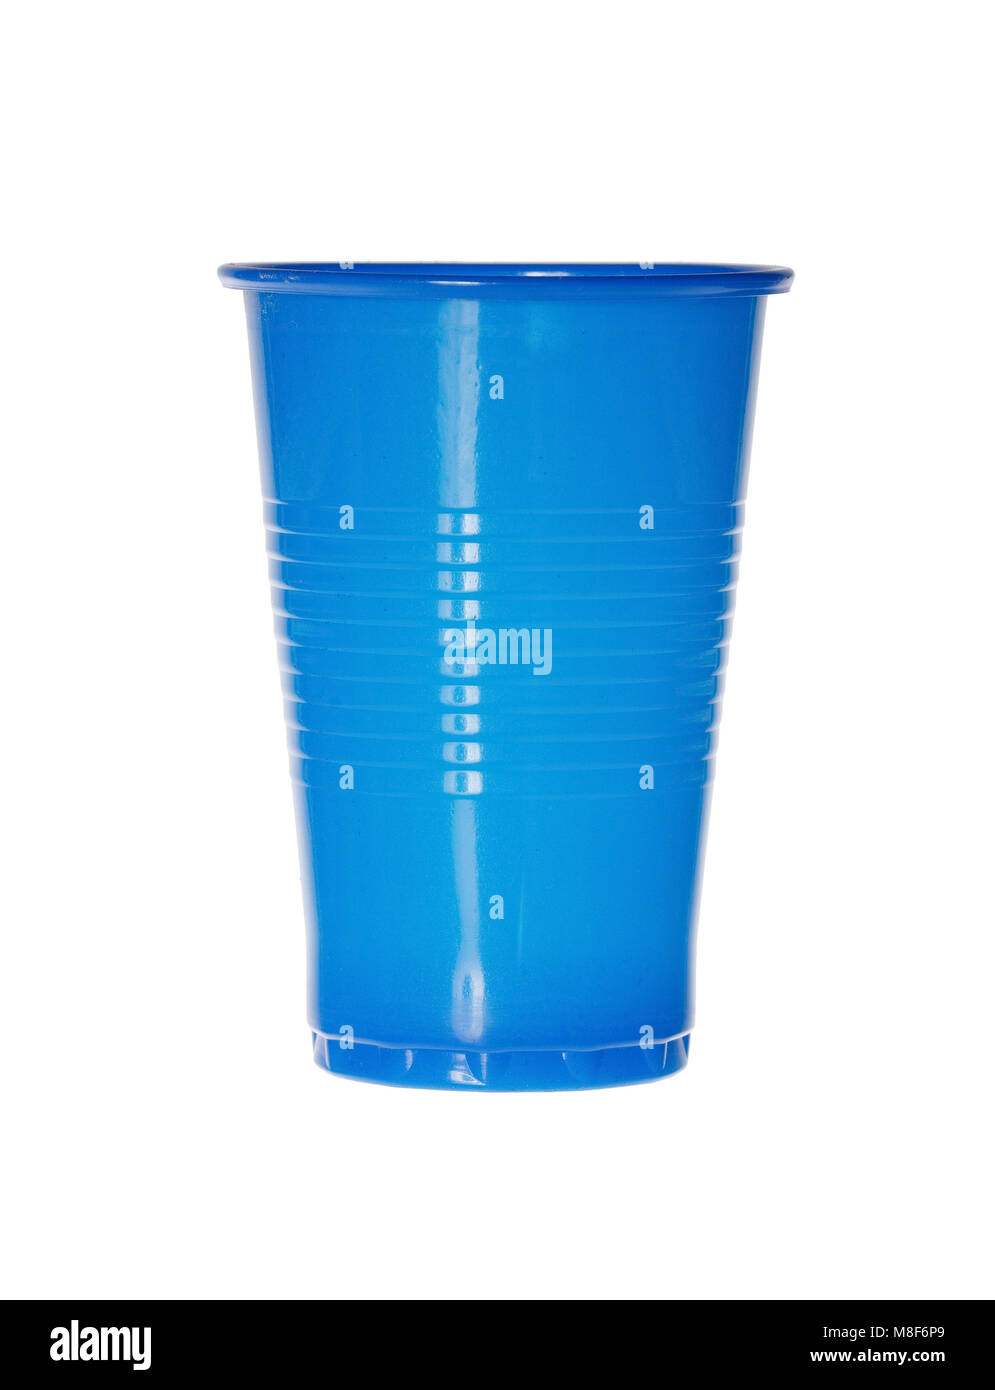 https://c8.alamy.com/comp/M8F6P9/close-up-image-of-a-blue-disposable-cup-against-on-white-M8F6P9.jpg